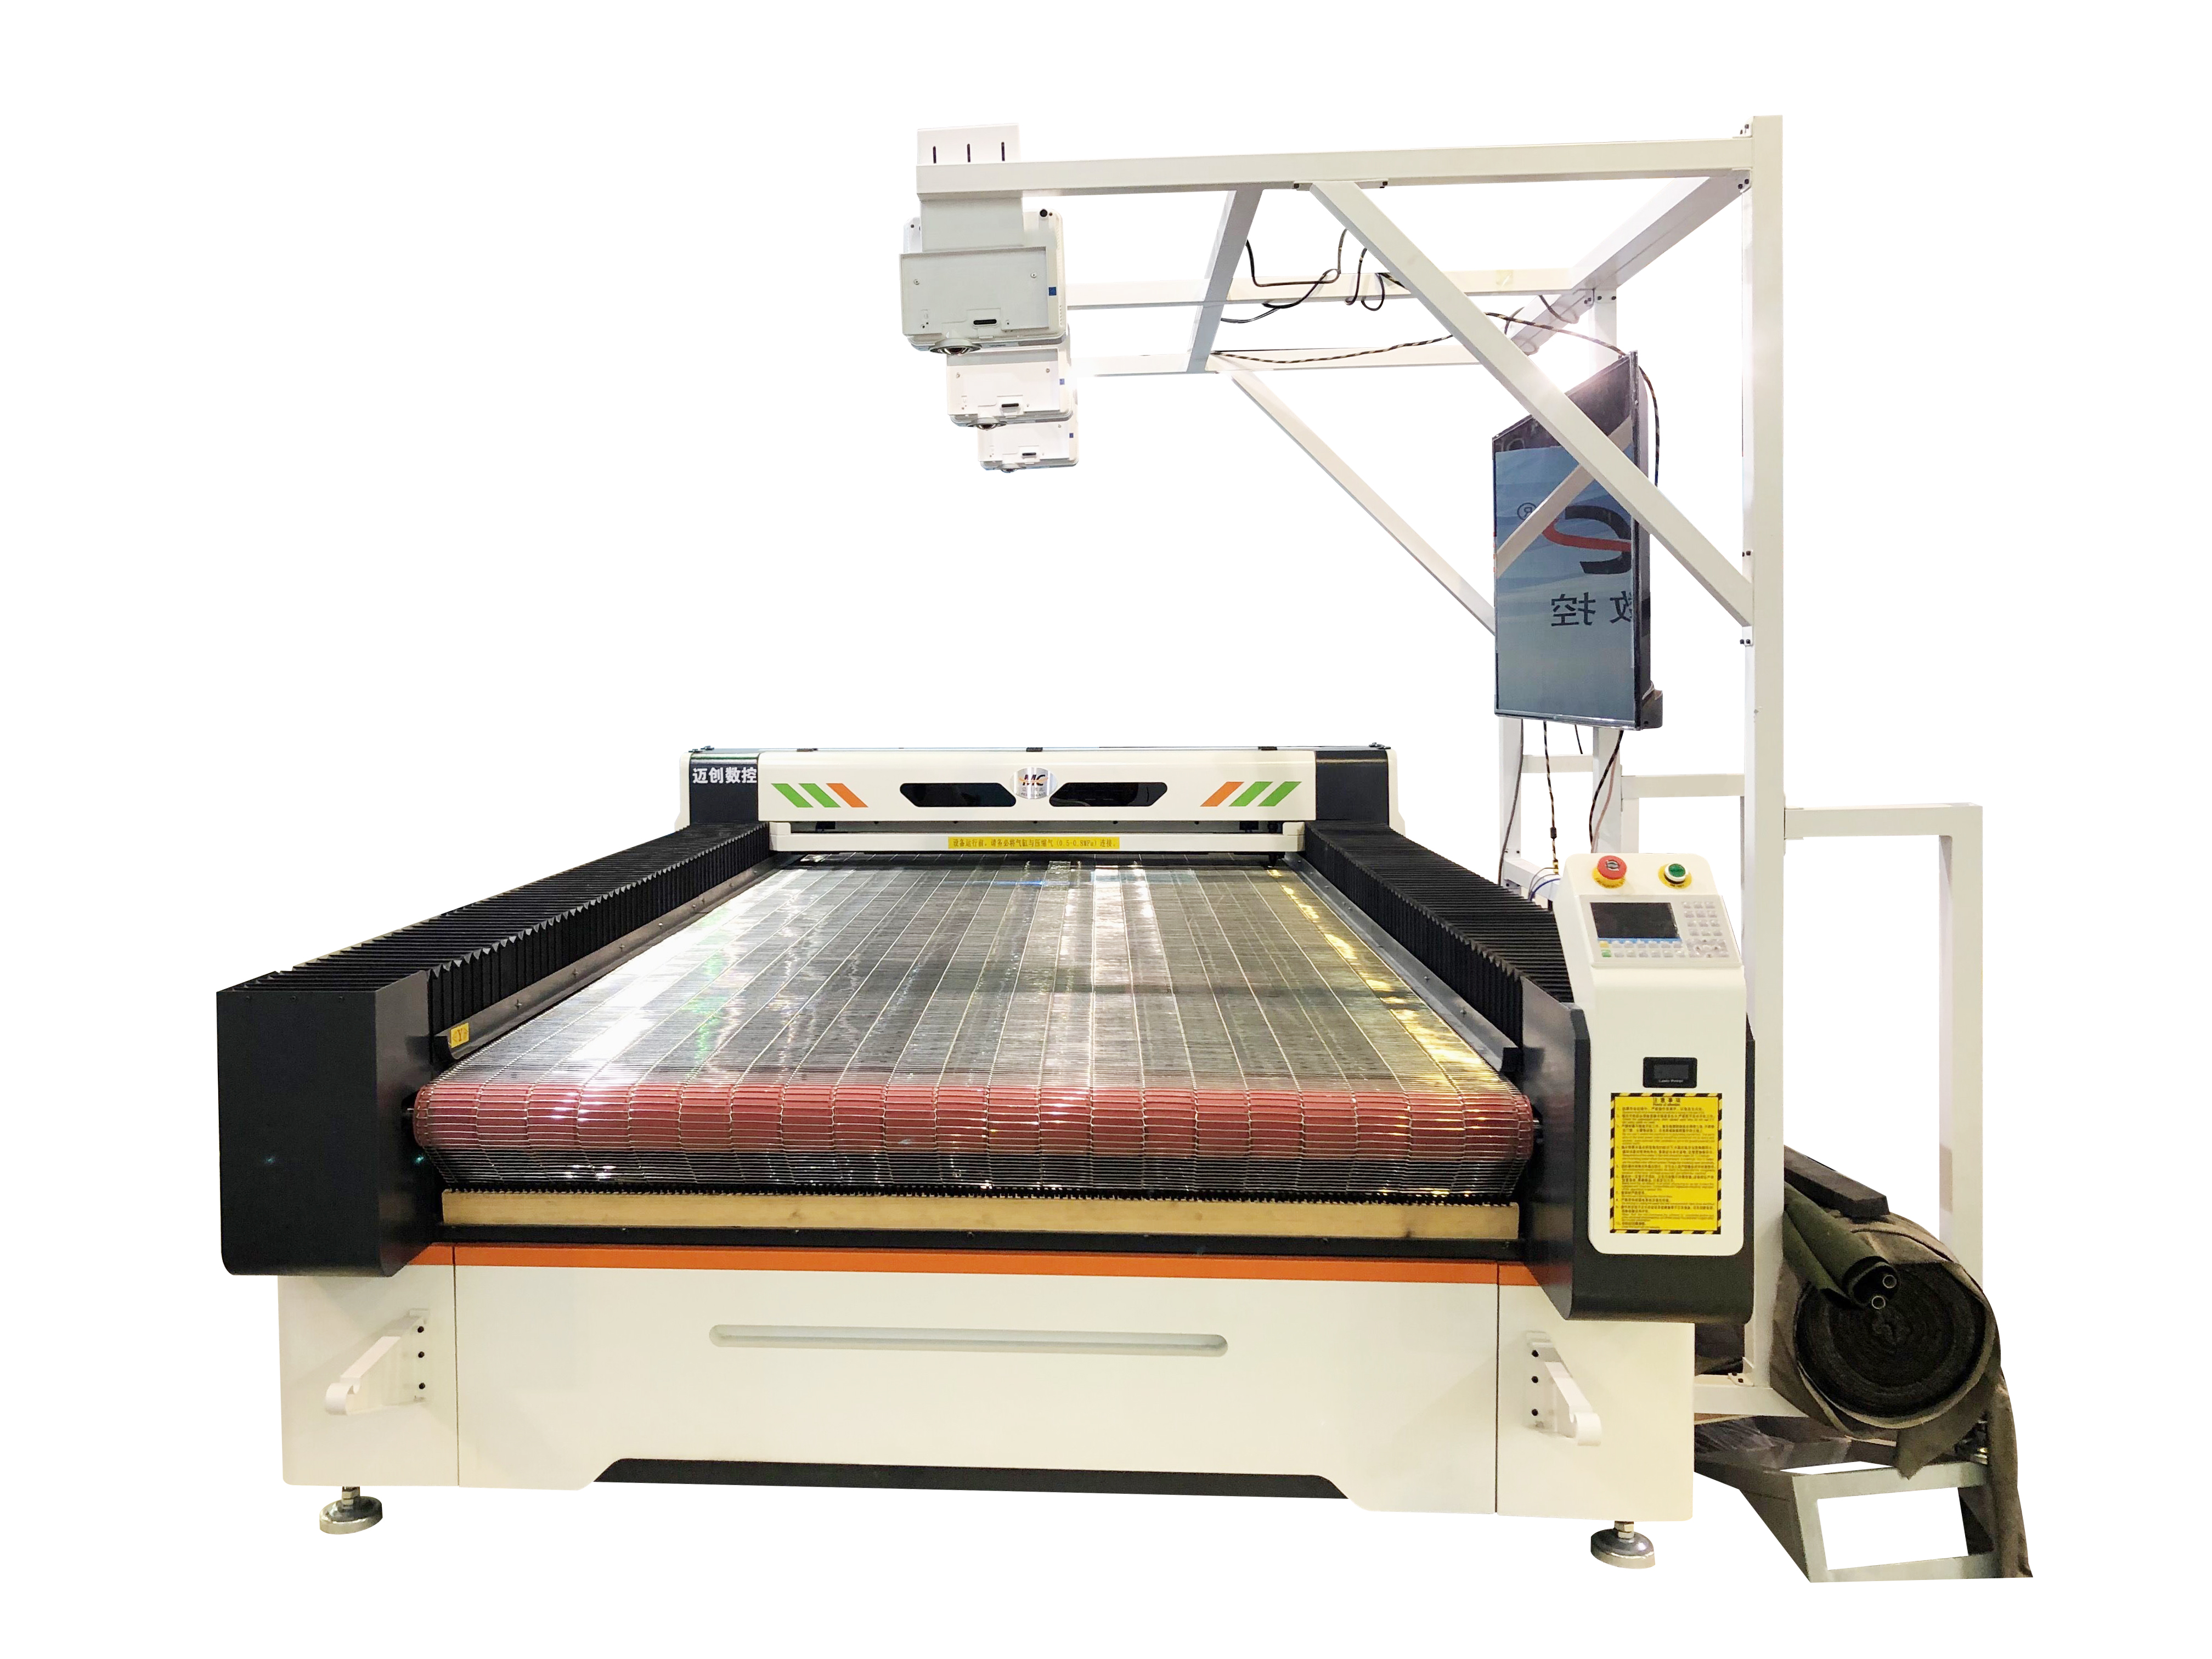 Is the fabric sofa laser cutting machine easy to use?